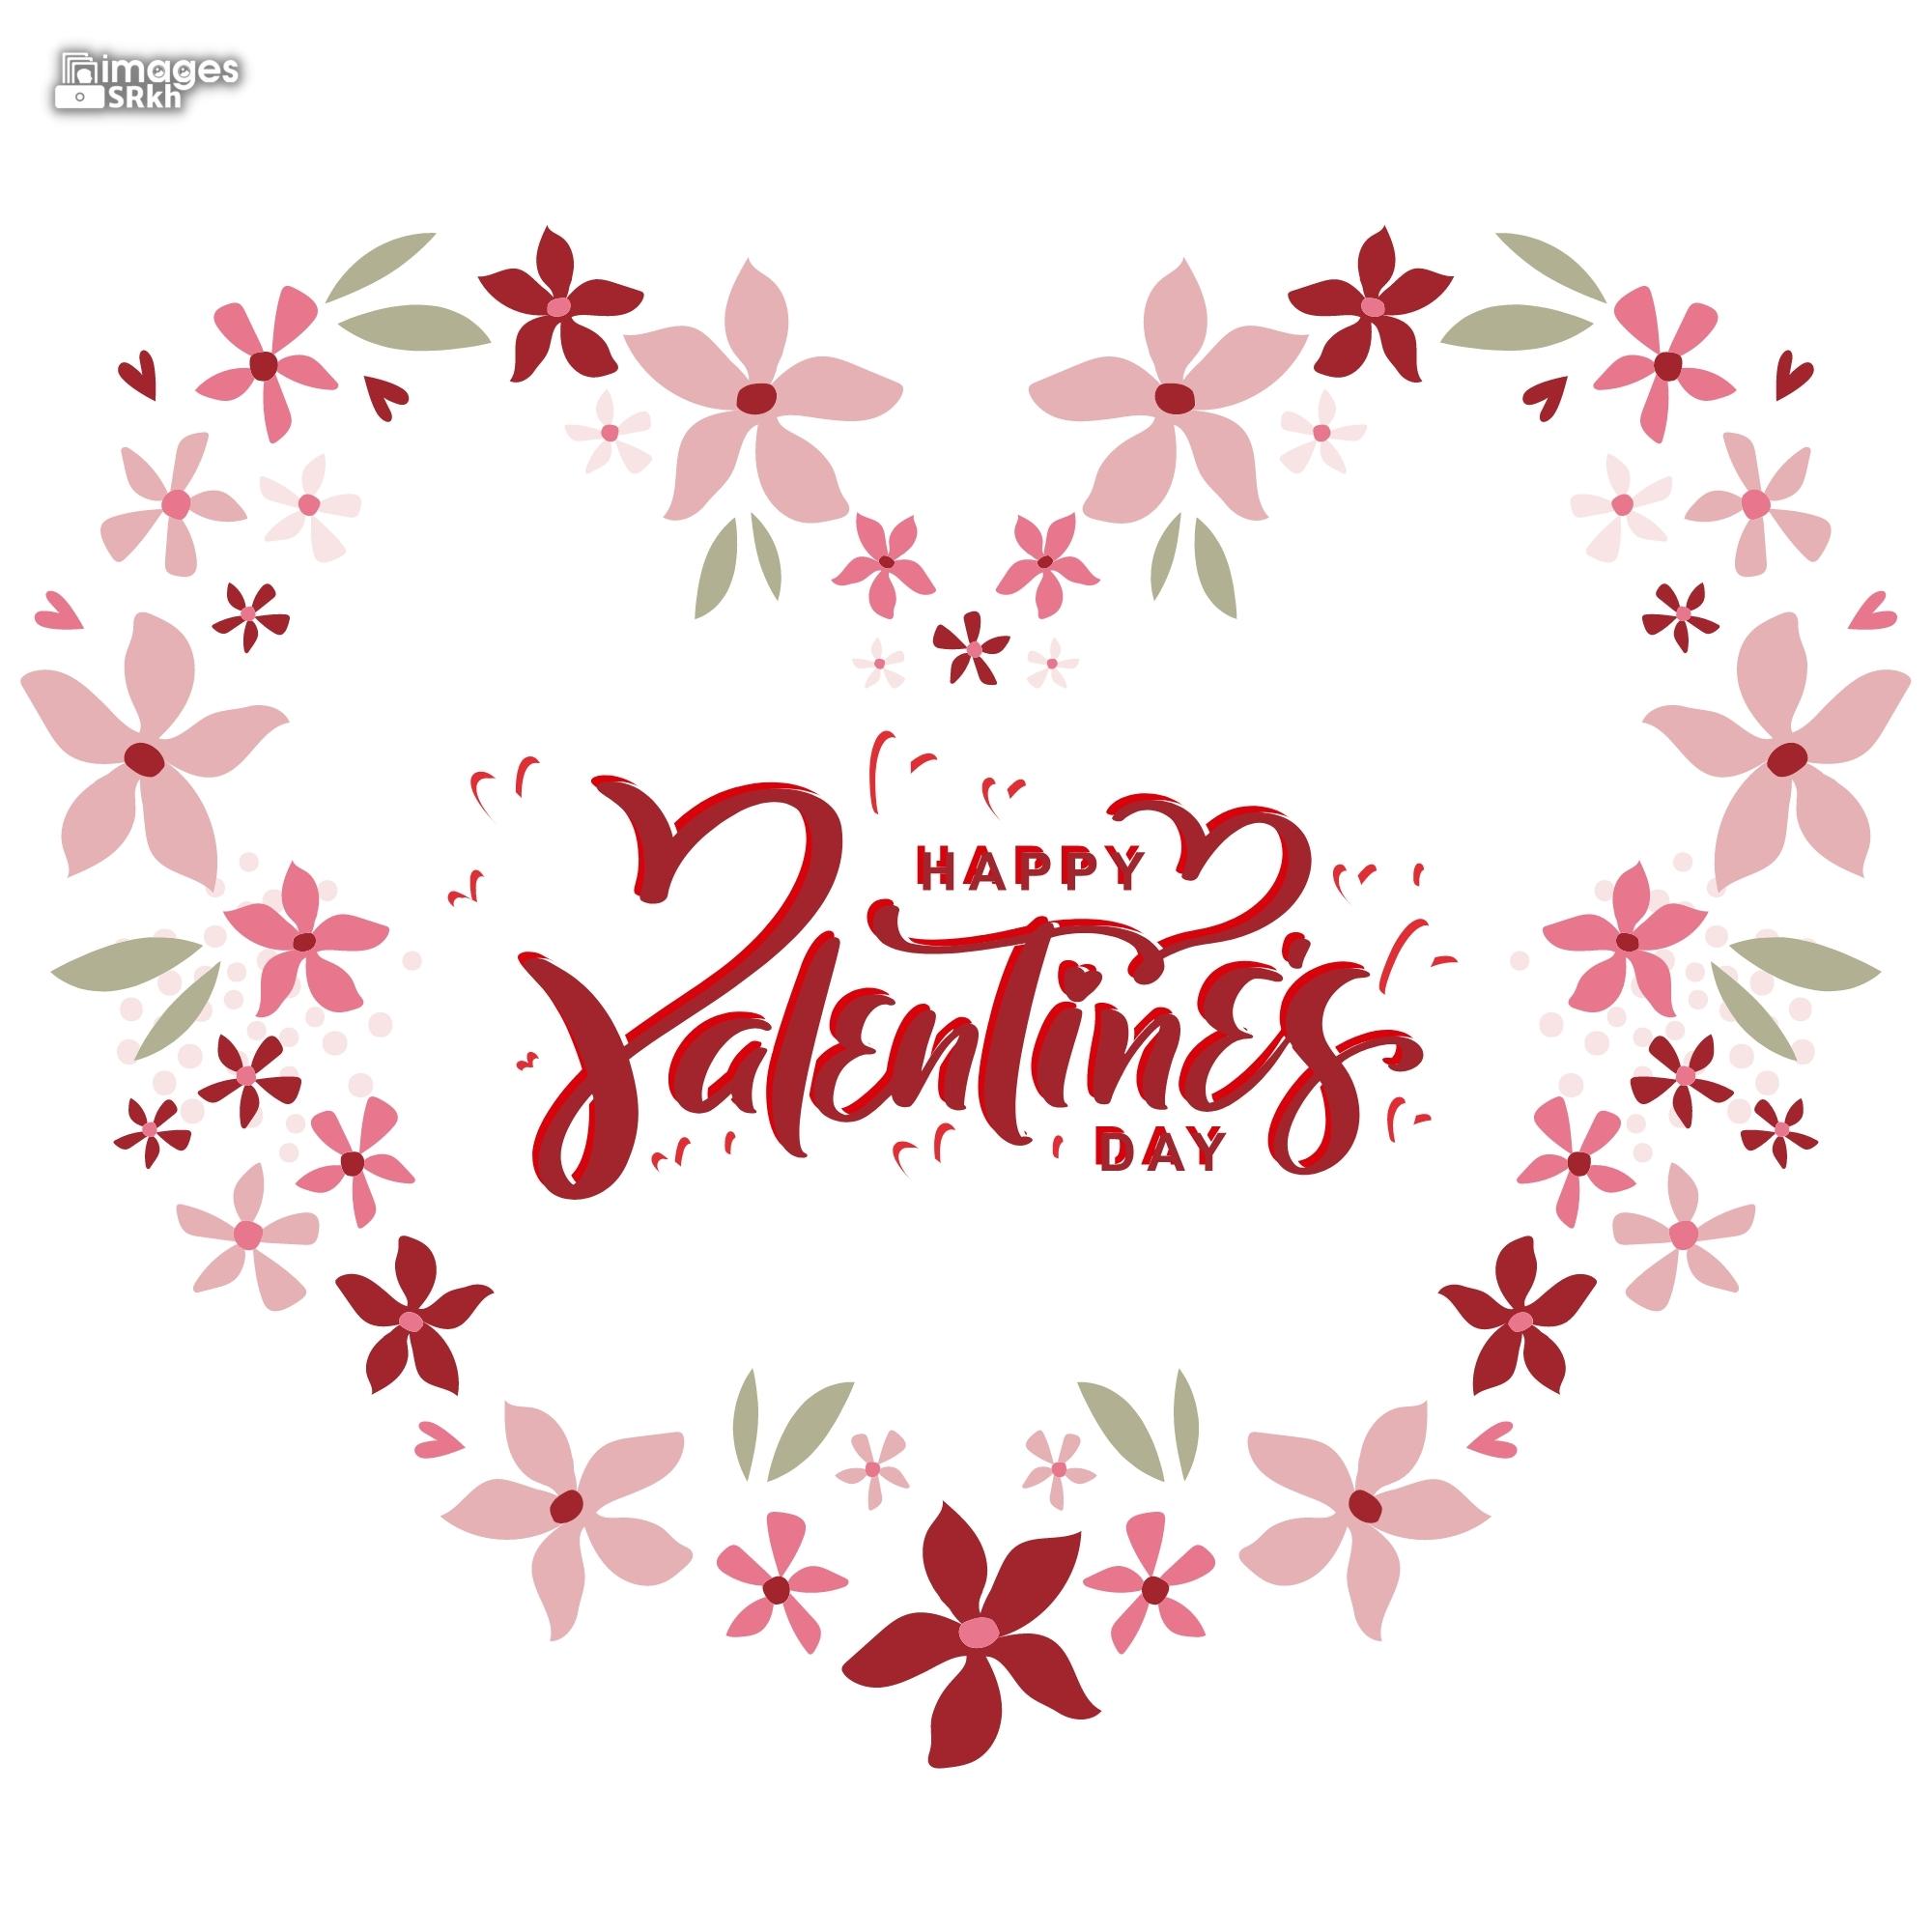 Happy Valentines Day | 437 | PREMIUM IMAGES | Wishes for Love